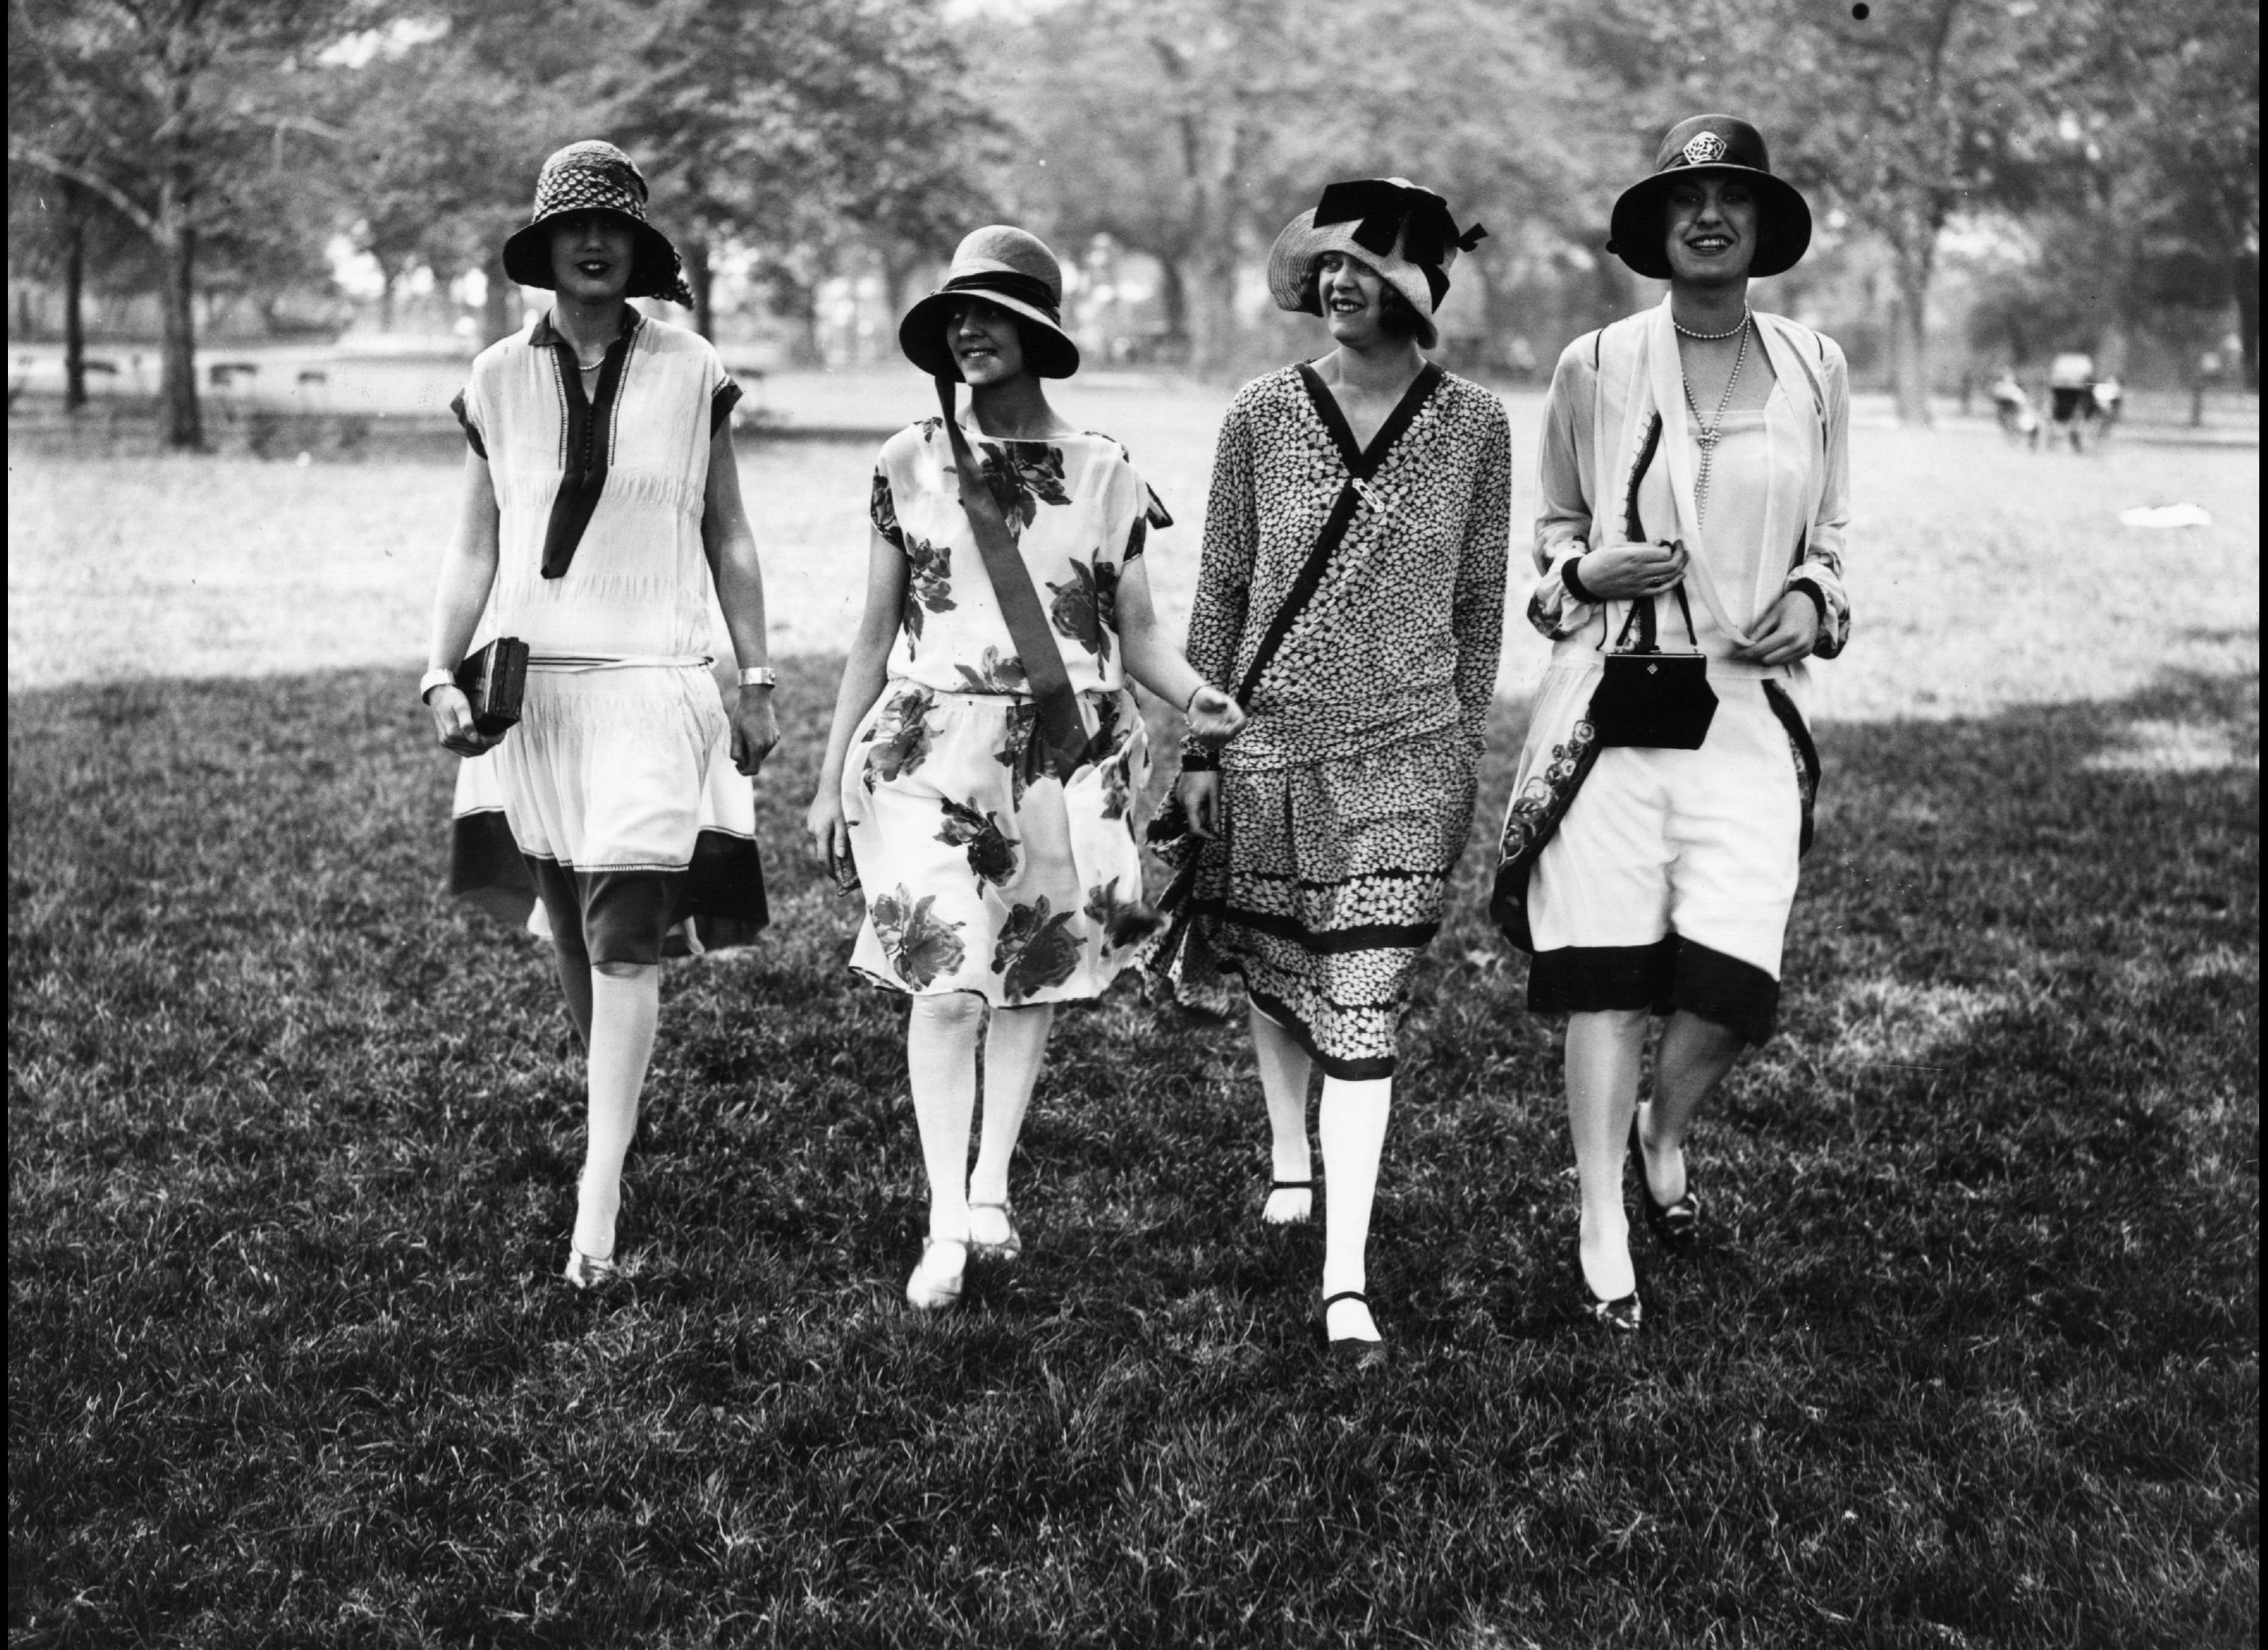 Prohibition Sparked a Women's Fashion Revolution - Prohibition: An